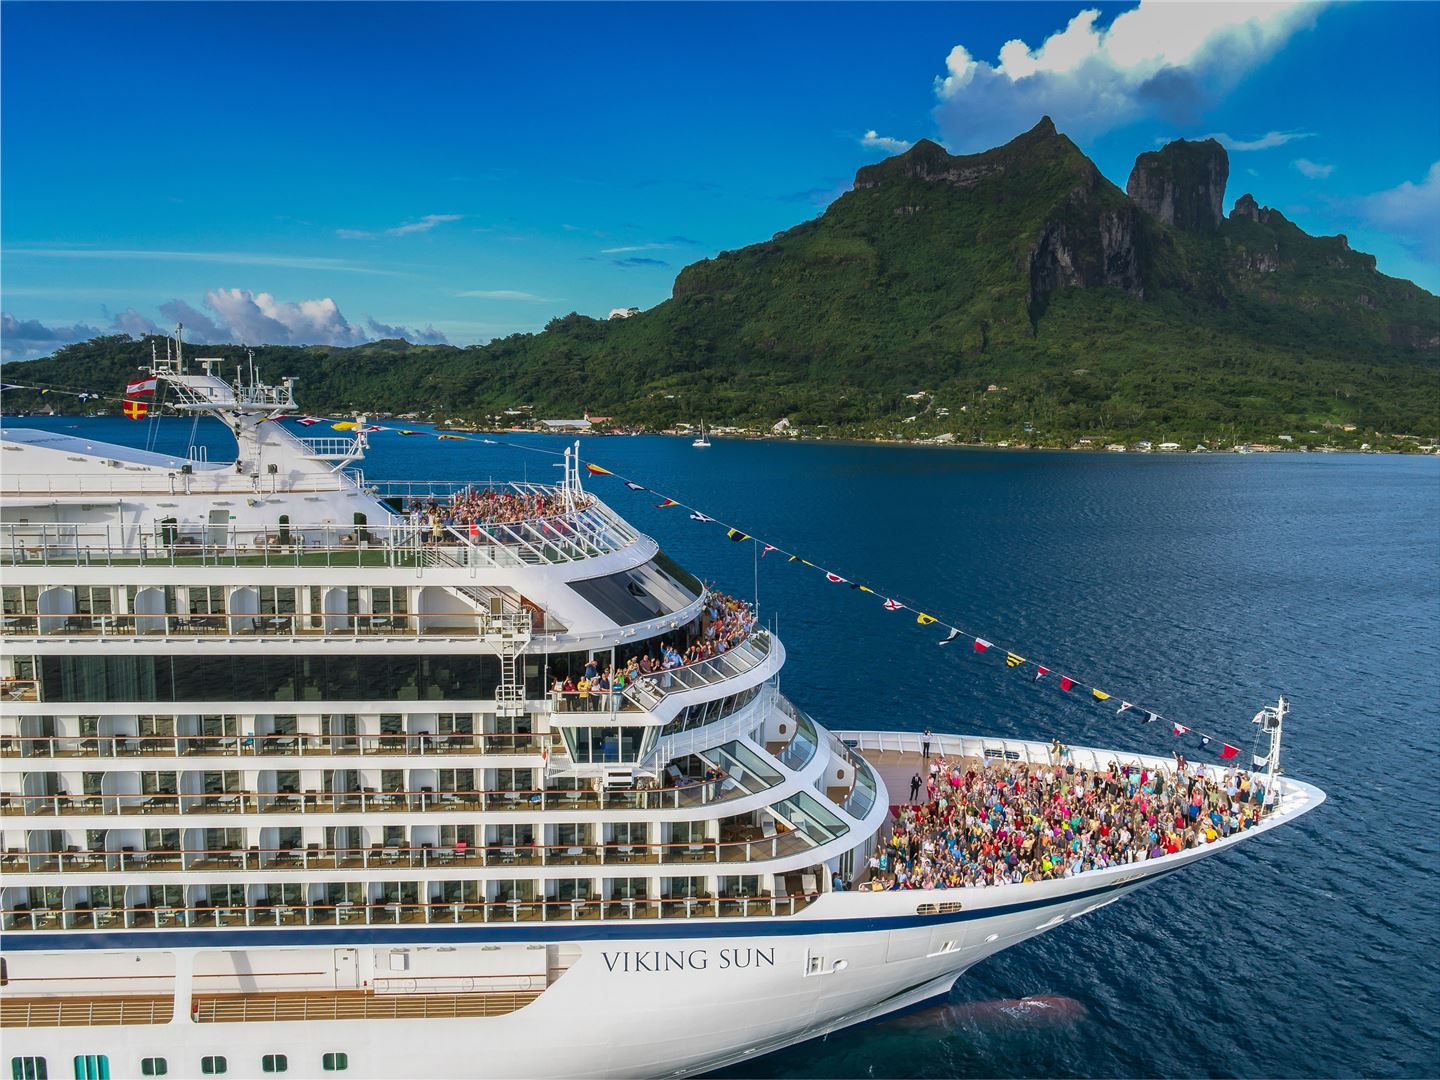 Viking Ocean Announces Itinerary, Dates for 2021 World Cruise